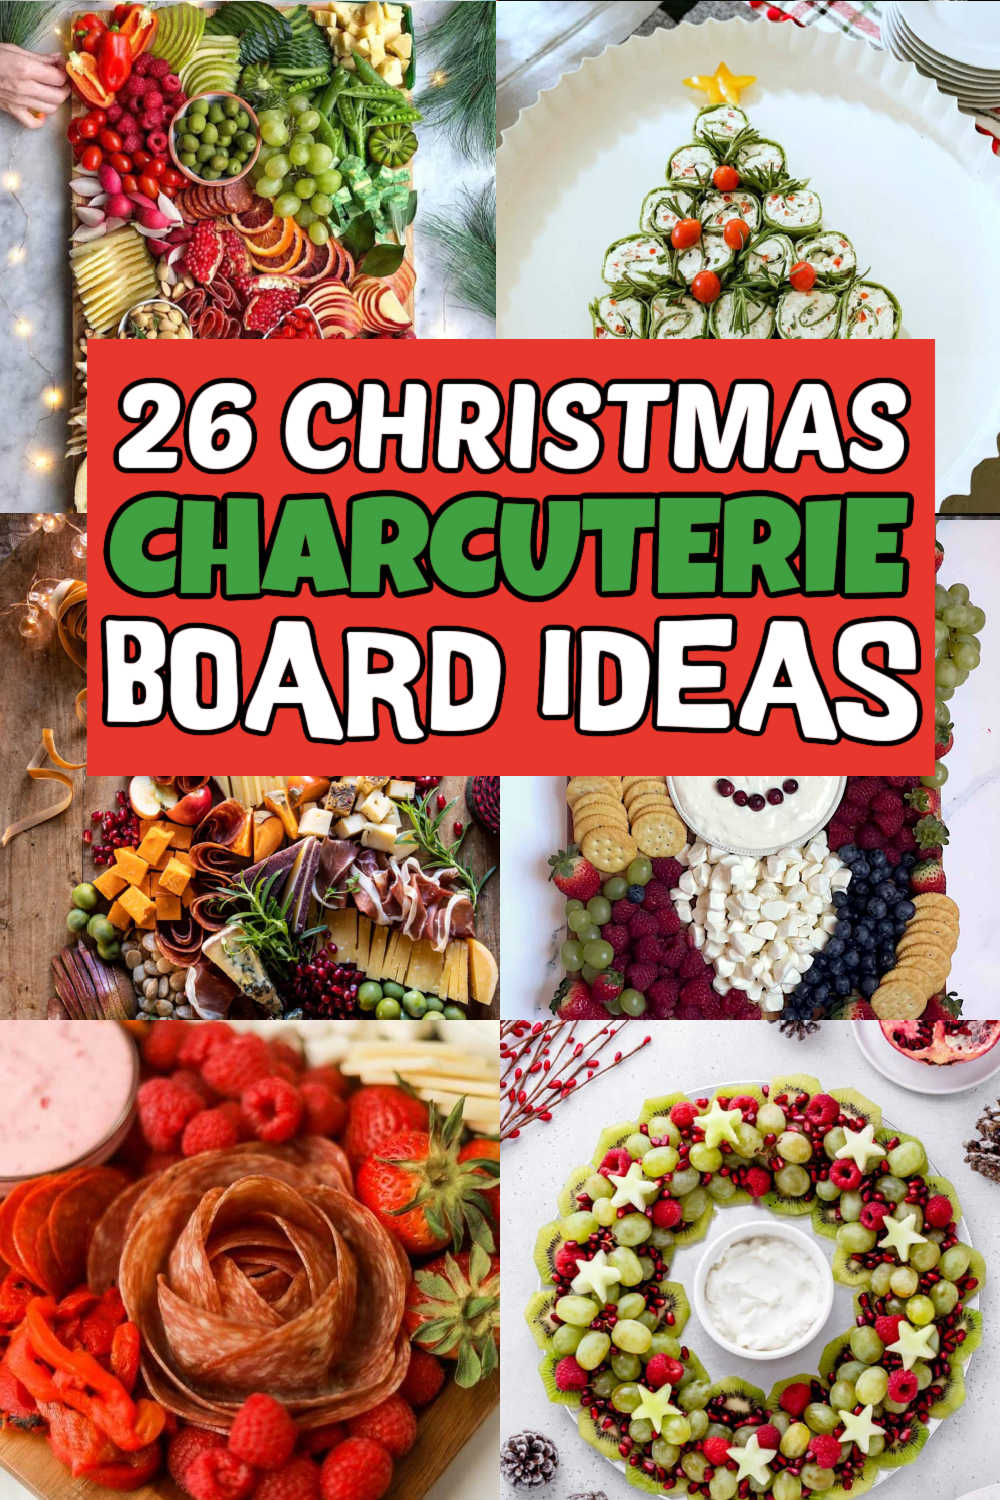 A Christmas charcuterie board is an excellent option for holiday parties. Easy and delicious charcuterie board ideas for Christmas.  In this article, we'll look at several delicious charcuterie board ideas for Christmas. With an emphasis on using seasonal ingredients and flavors. #eatingonadime #christmascharcuterieboardideas #charcuterieboardideas